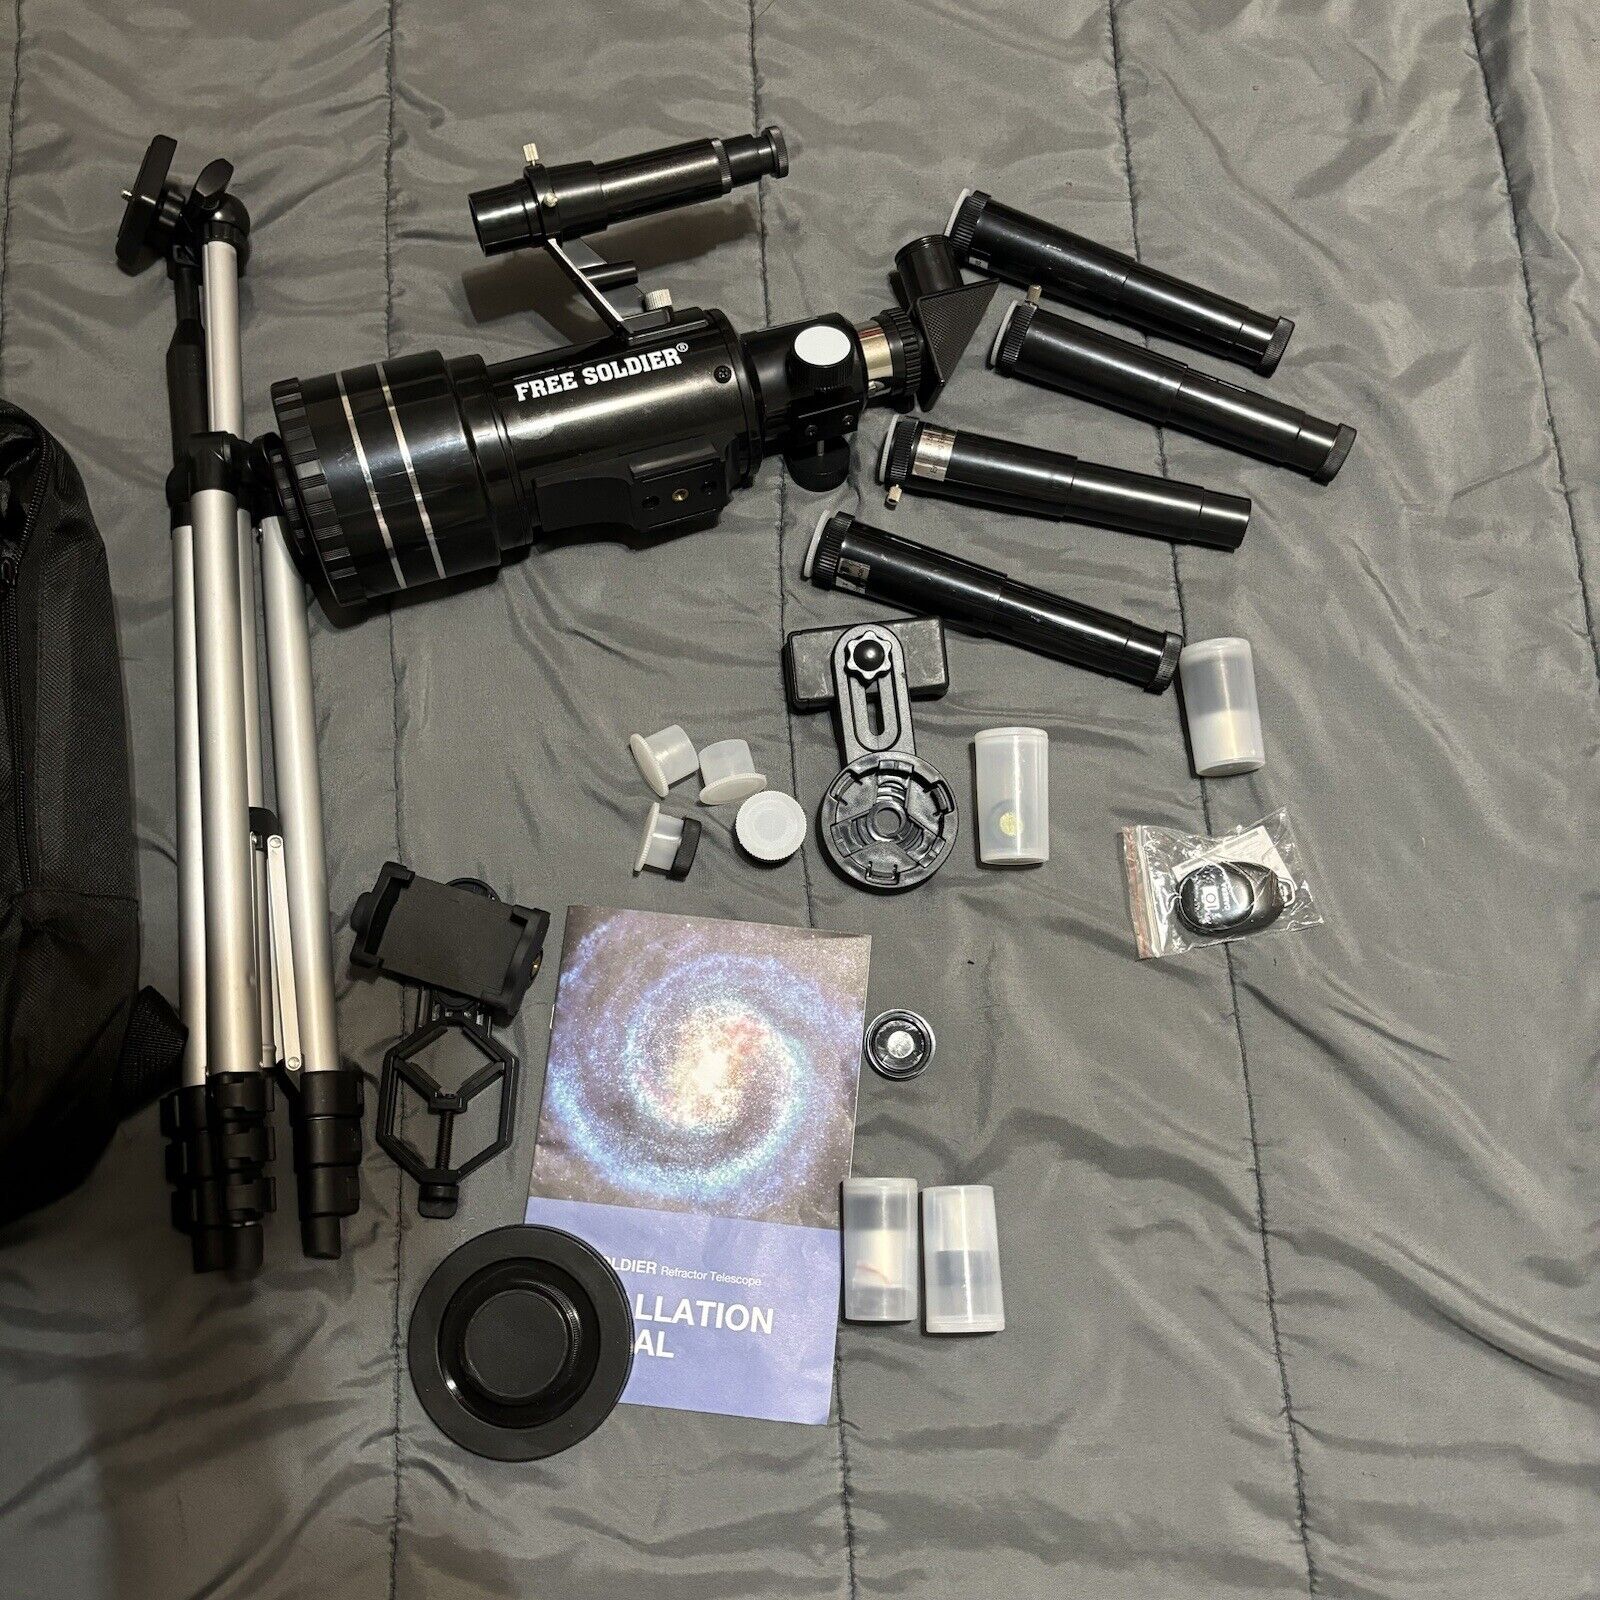 Free Soldier telescope with accessories Model 30070 Telescope